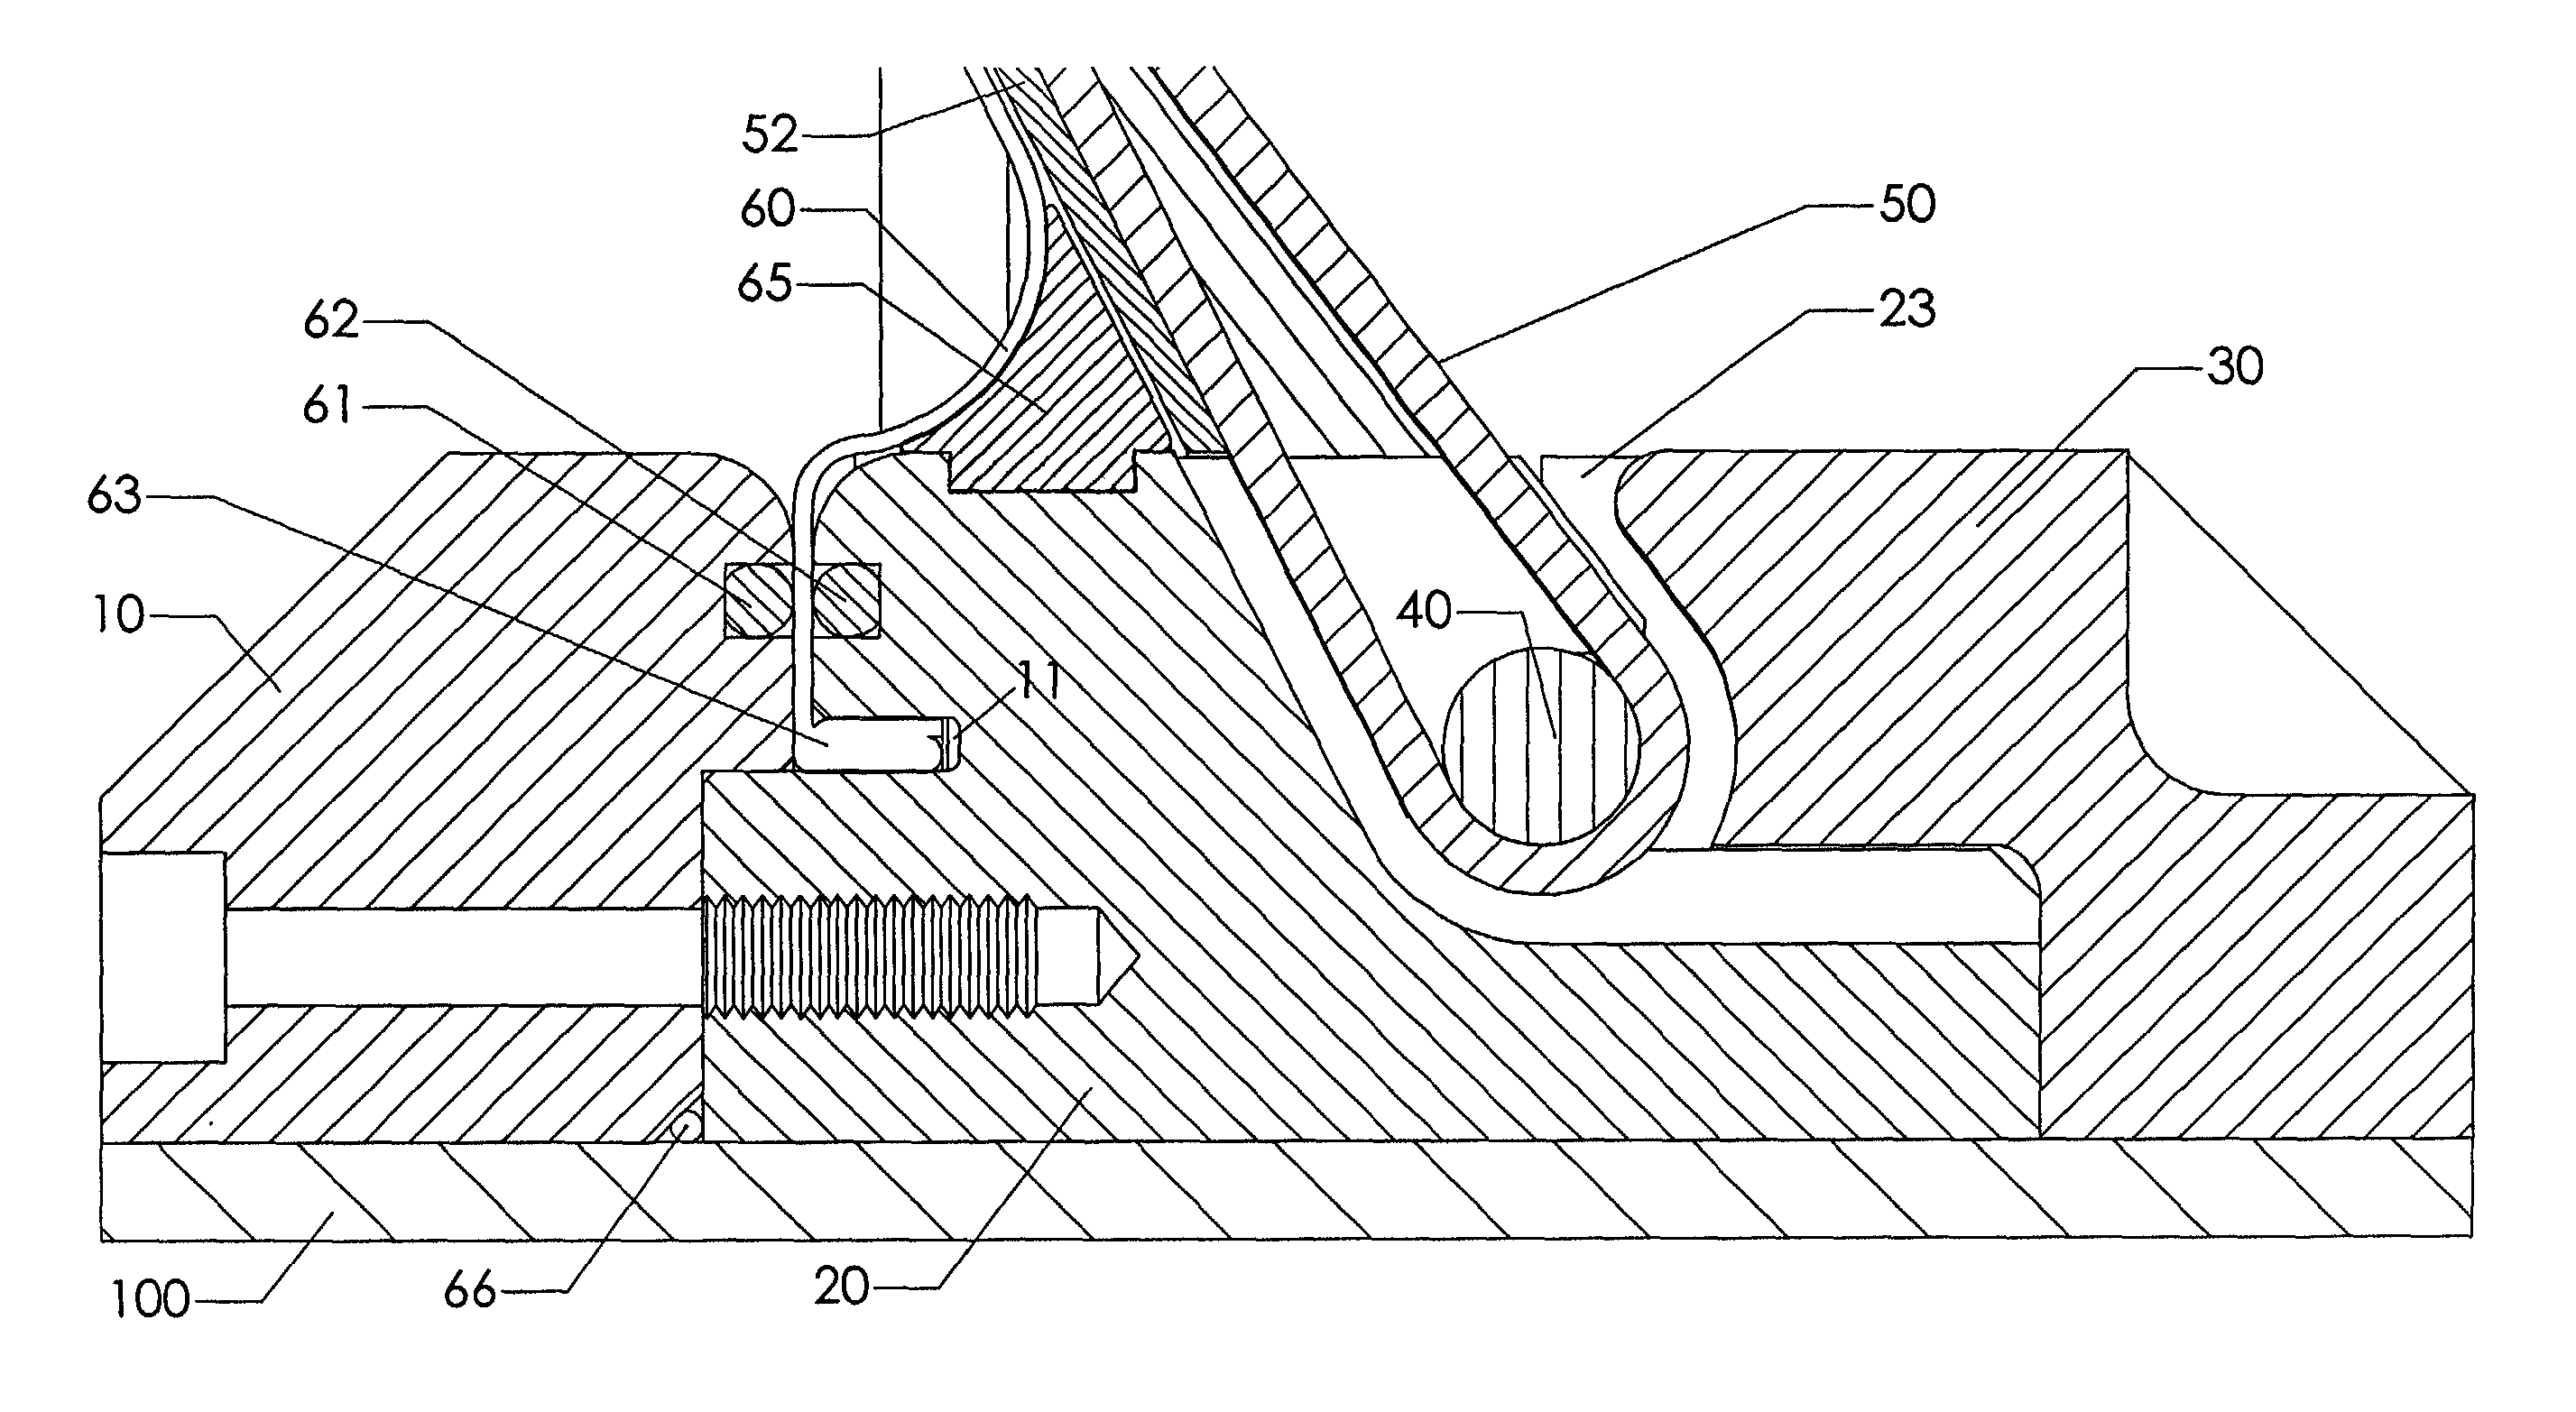 Apparatus for sealing and restraining the flexible pressure boundary of an inflatable spacecraft